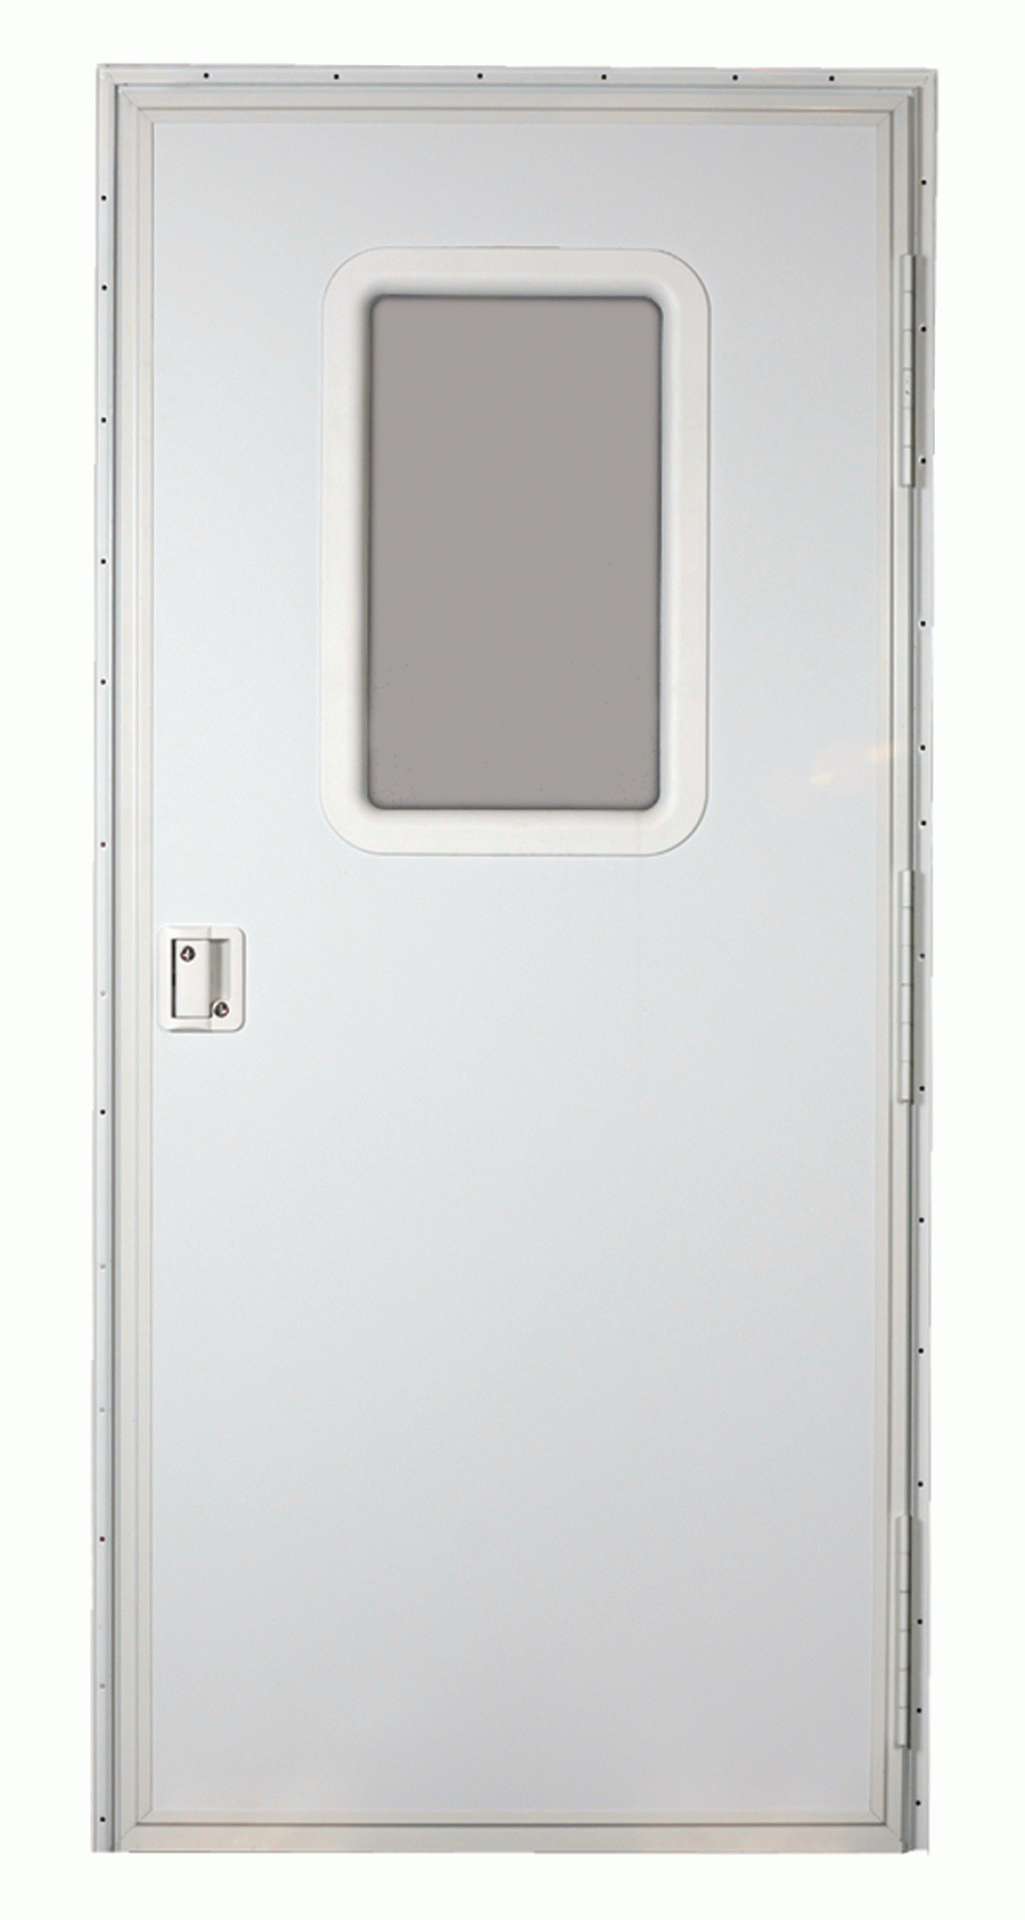 AP PRODUCTS | 015-217717 | TOWABLE ENTRY DOOR RH SQUARE 26" x 72" - POLAR WHITE